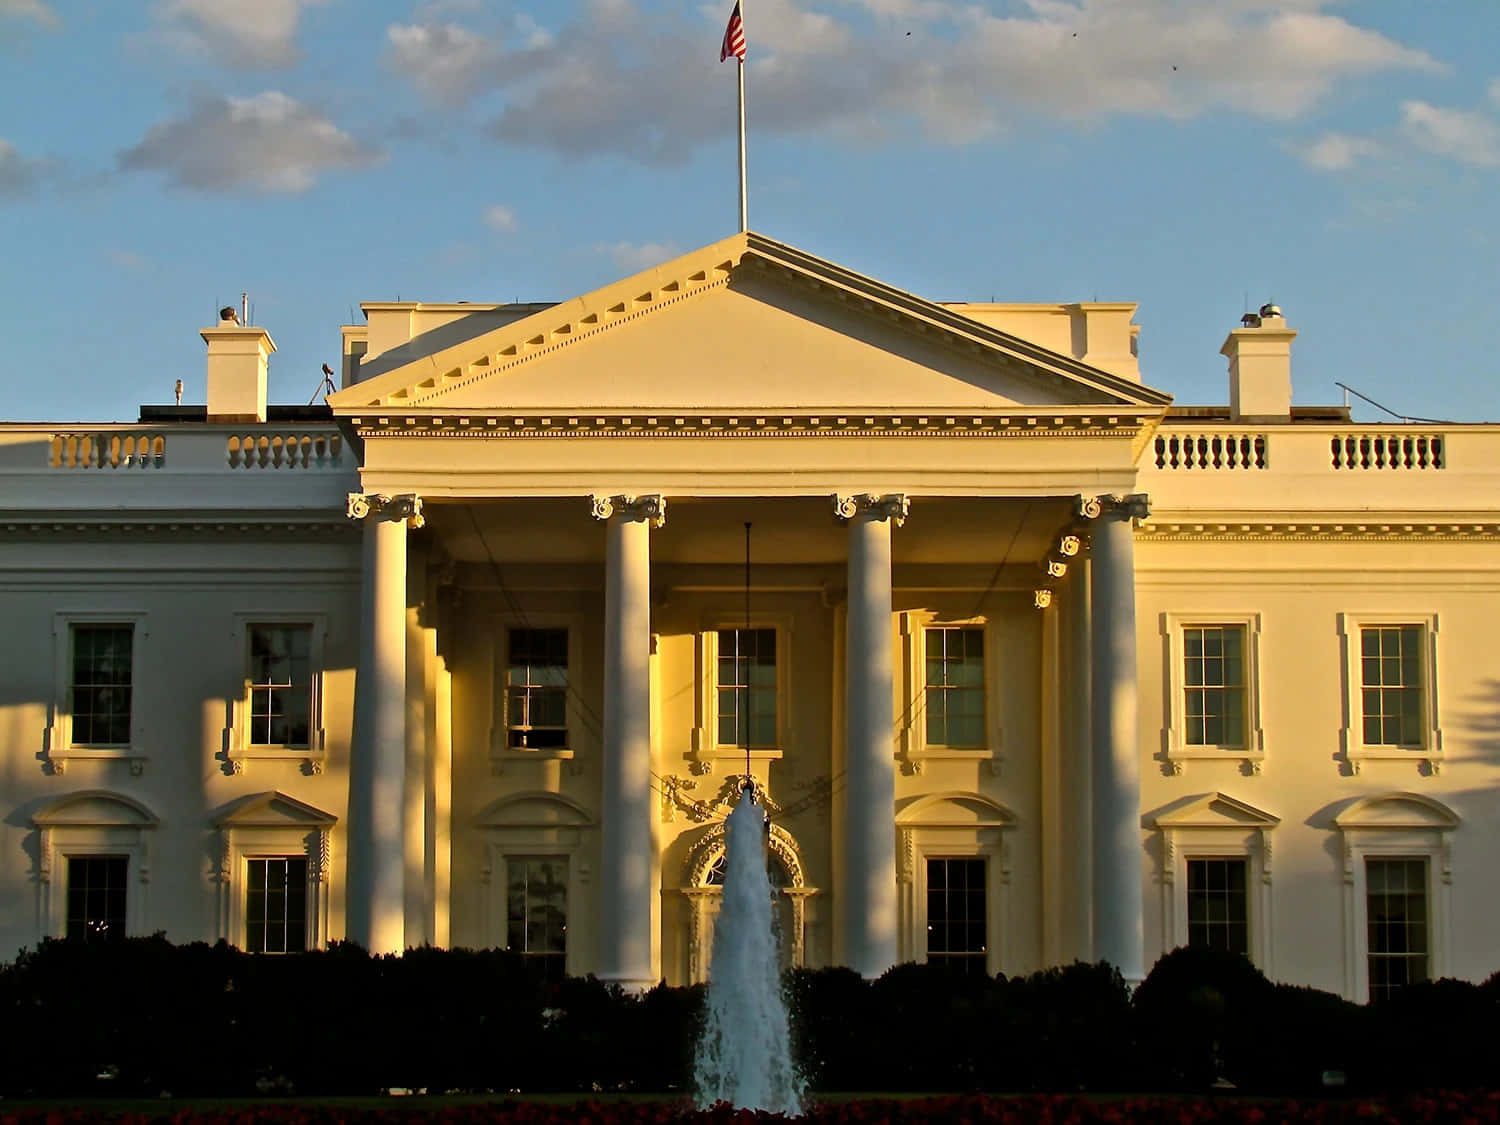 The White House Is A Large Building